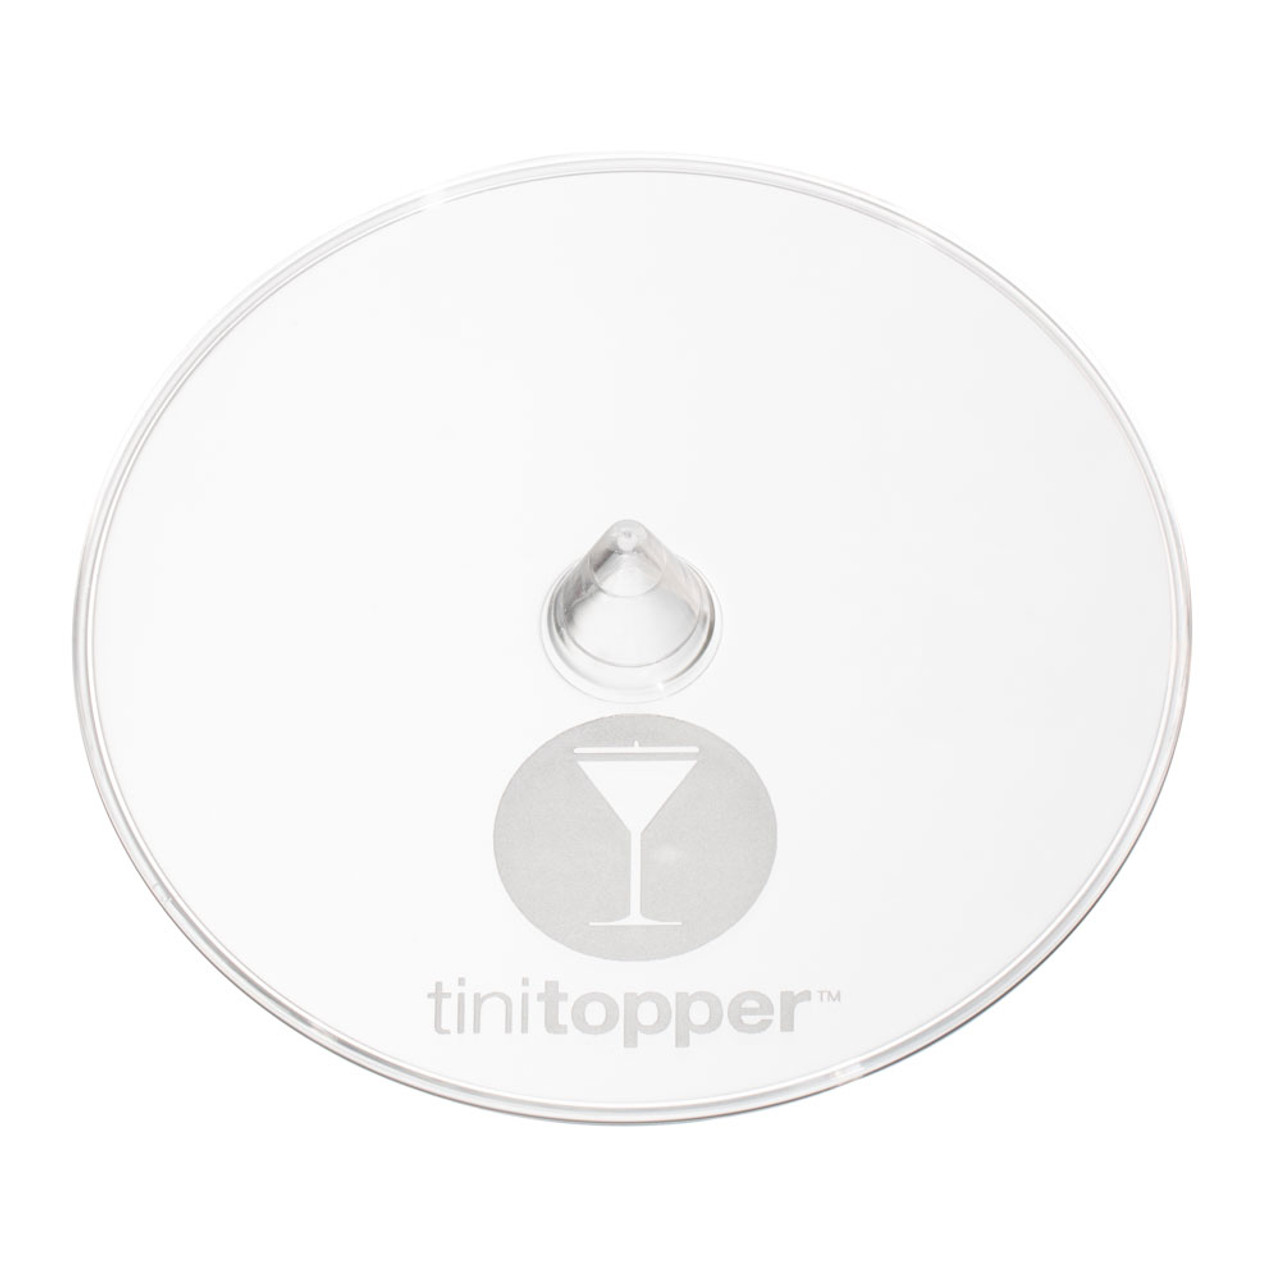 Multi-Purpose Lid Cover and Spill Stopper - Milky Spoon